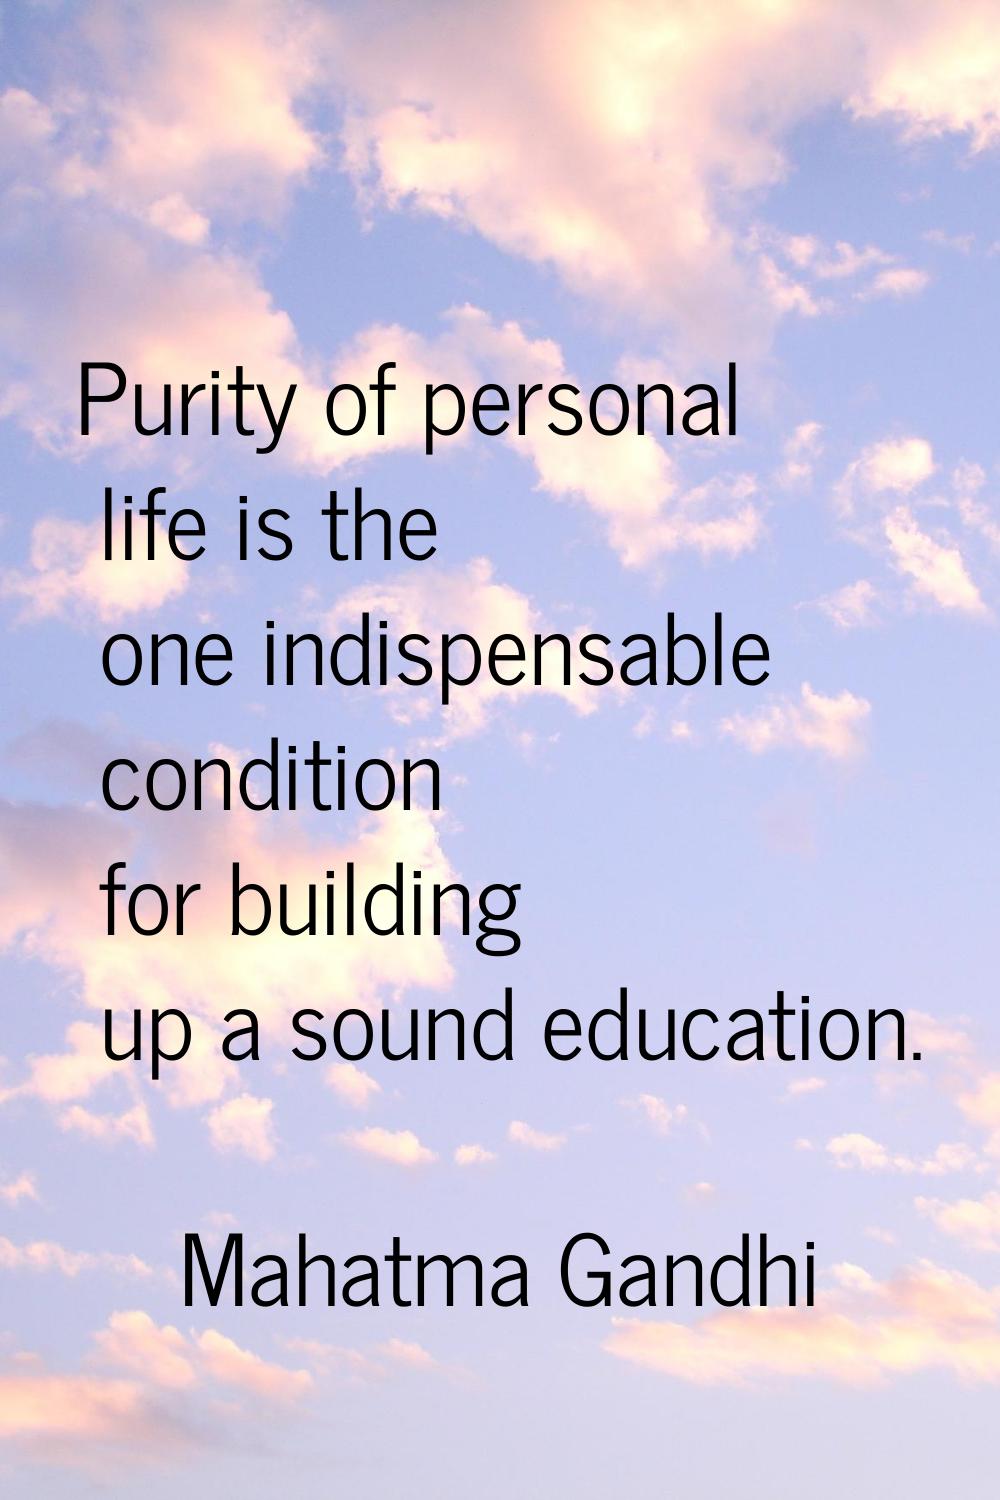 Purity of personal life is the one indispensable condition for building up a sound education.